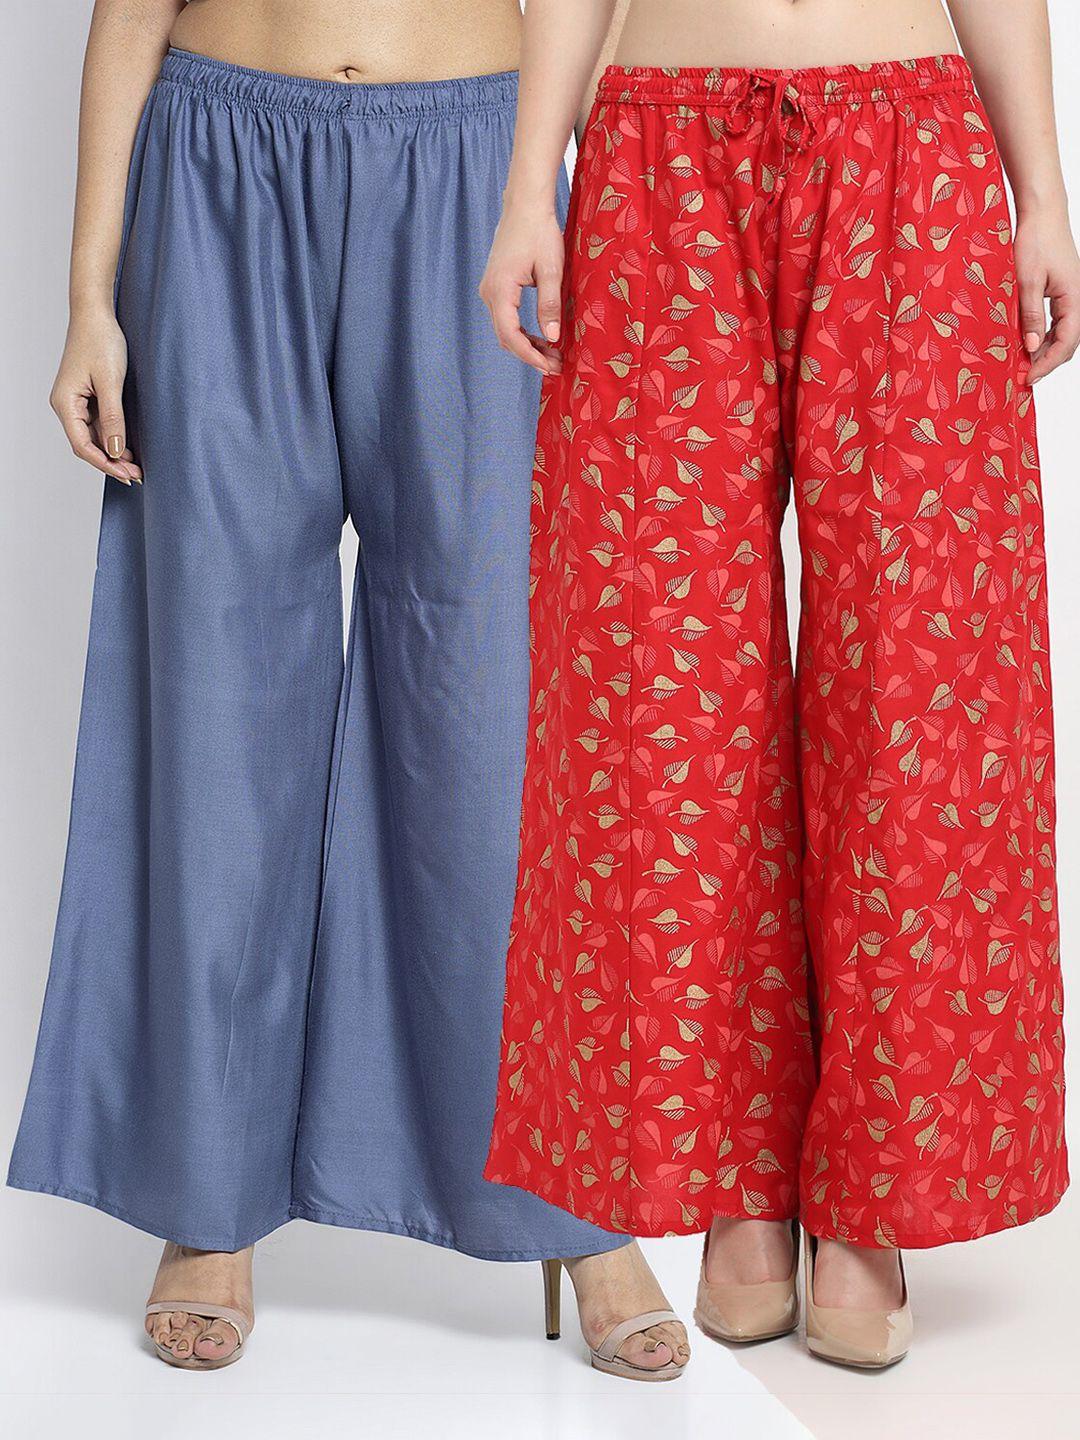 gracit women pack of 2 grey & red floral & solid printed knitted ethnic palazzos